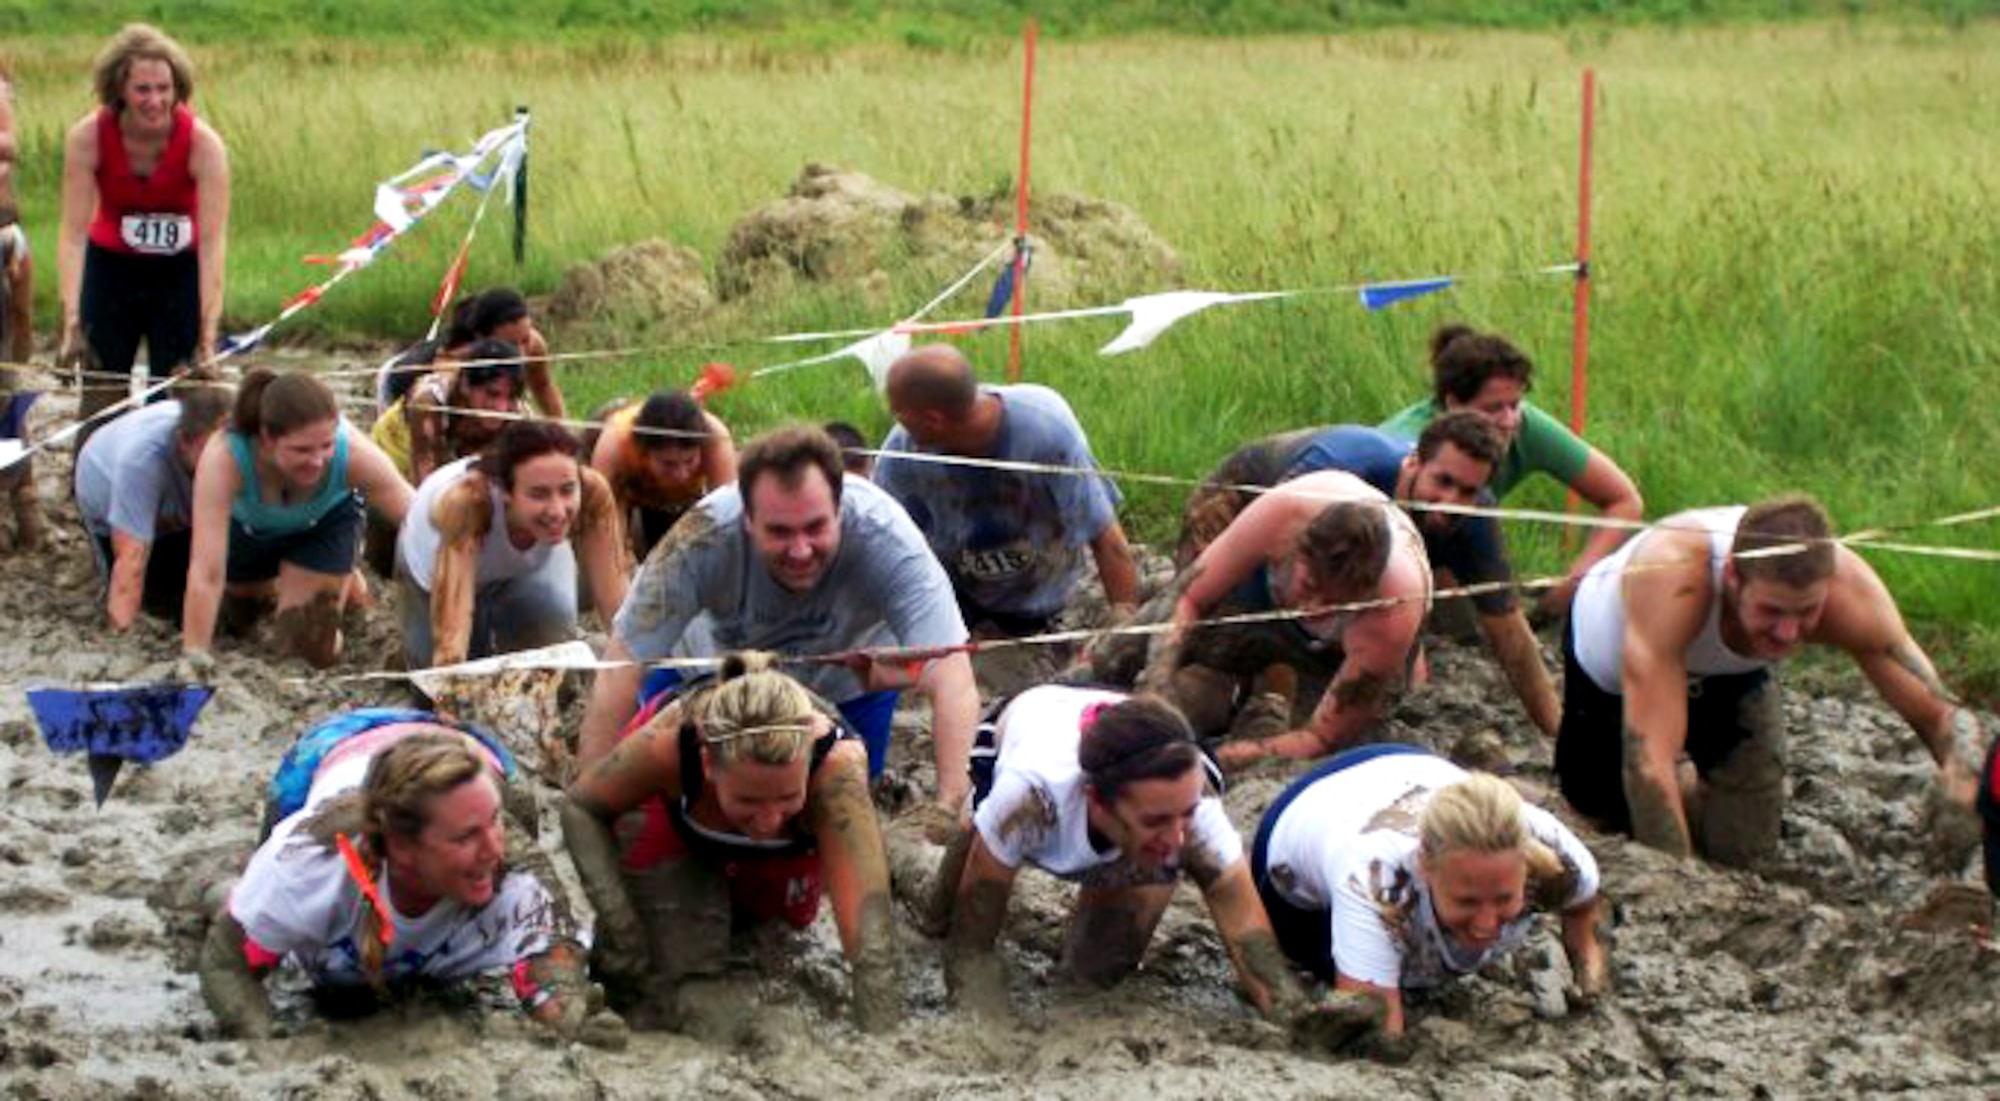 More than 1,000 runners navigated through 18 obstacles along a 3.2 mile course of muck, mud and hay during the 2nd Annual USO Mud Run at Mid-America Airport June 5, 2010. The 375th Civil Engineer Squadron helped construct the course and ensured its "mudworthiness" and numerous base volunteers assisted with the event. (Courtesy Photo)
